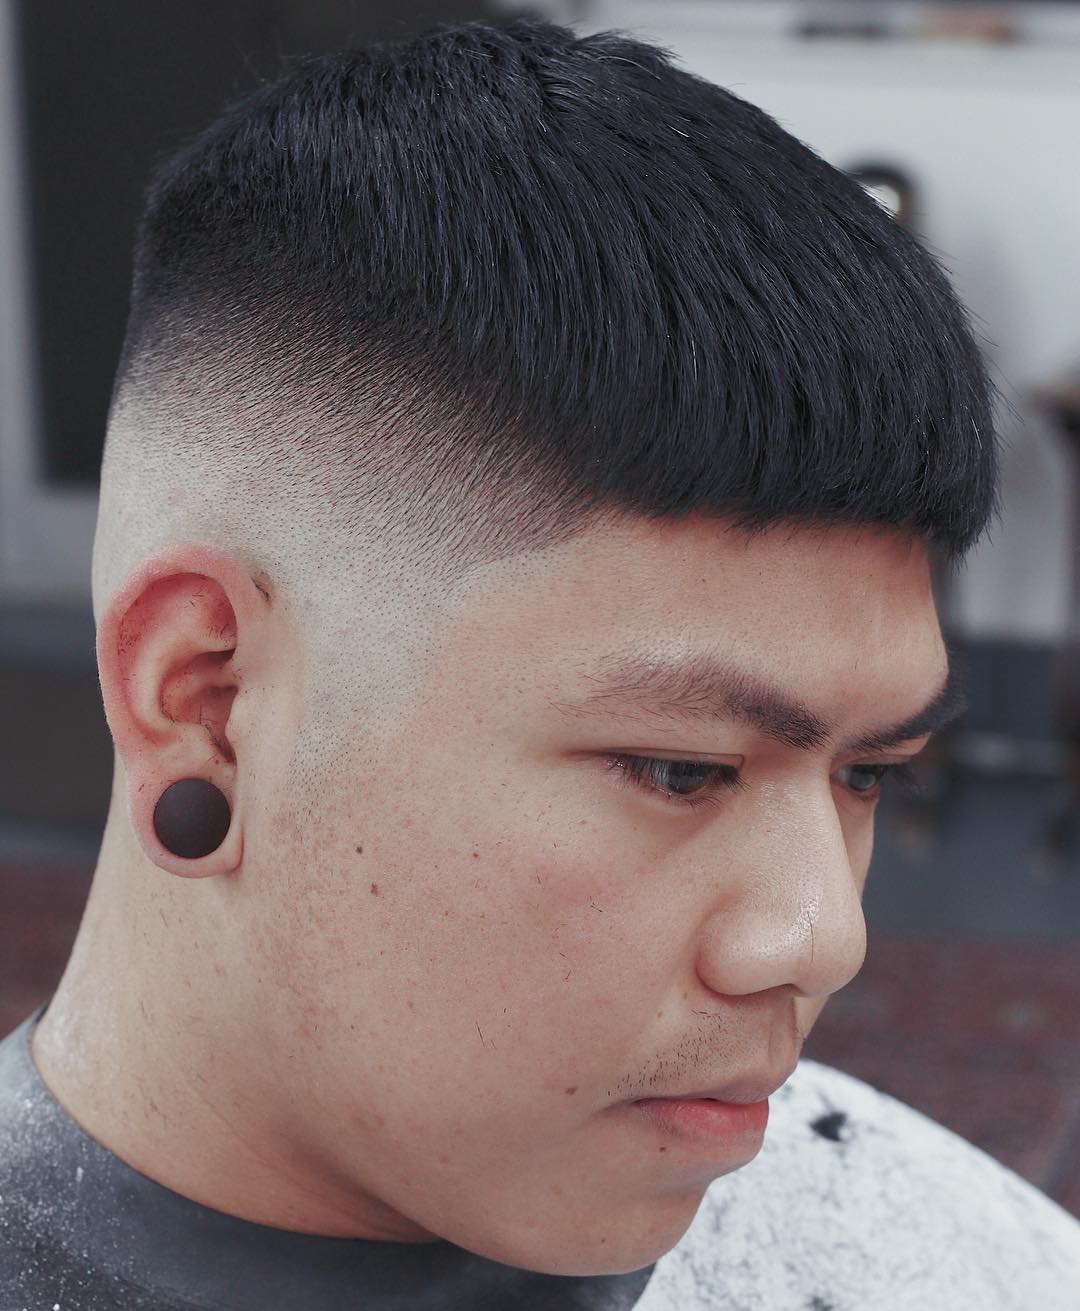 29 Best Hairstyles For Asian Men (2020 Styles)1080 x 1311